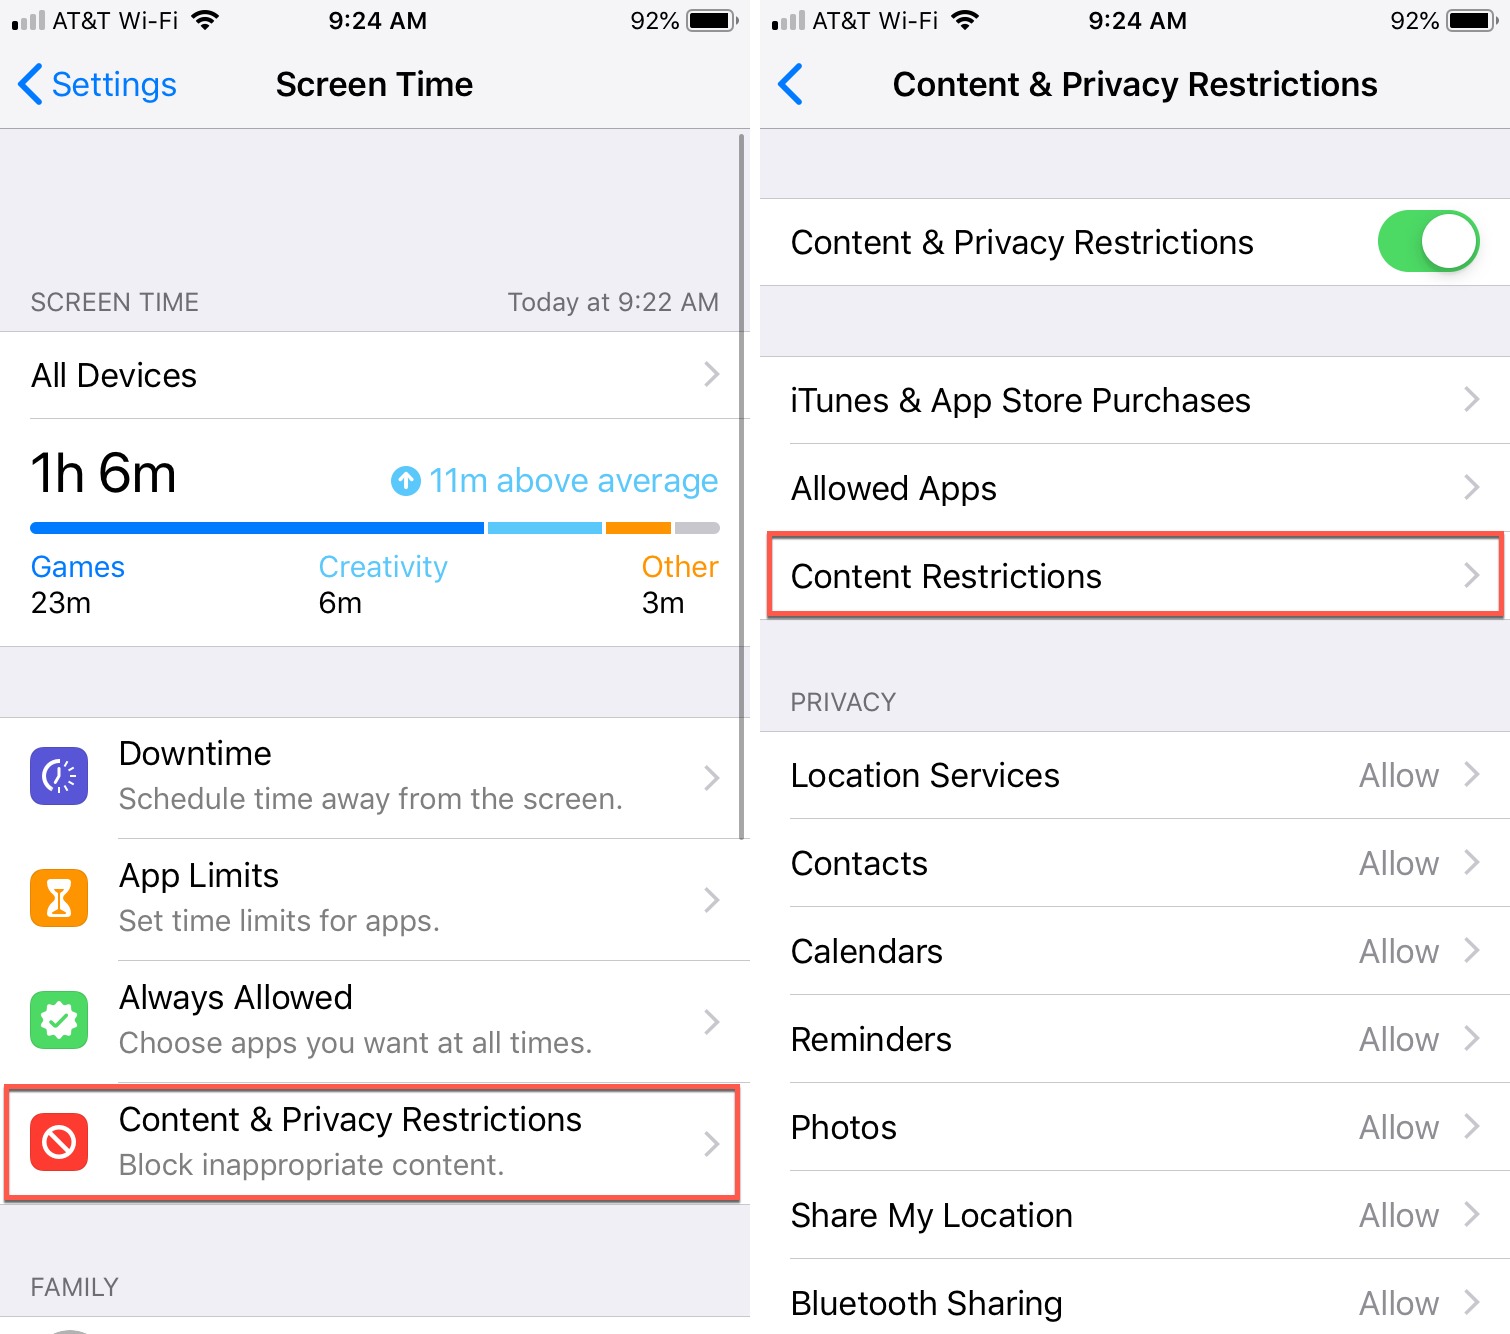 How to Block Websites on iPhone and iPad